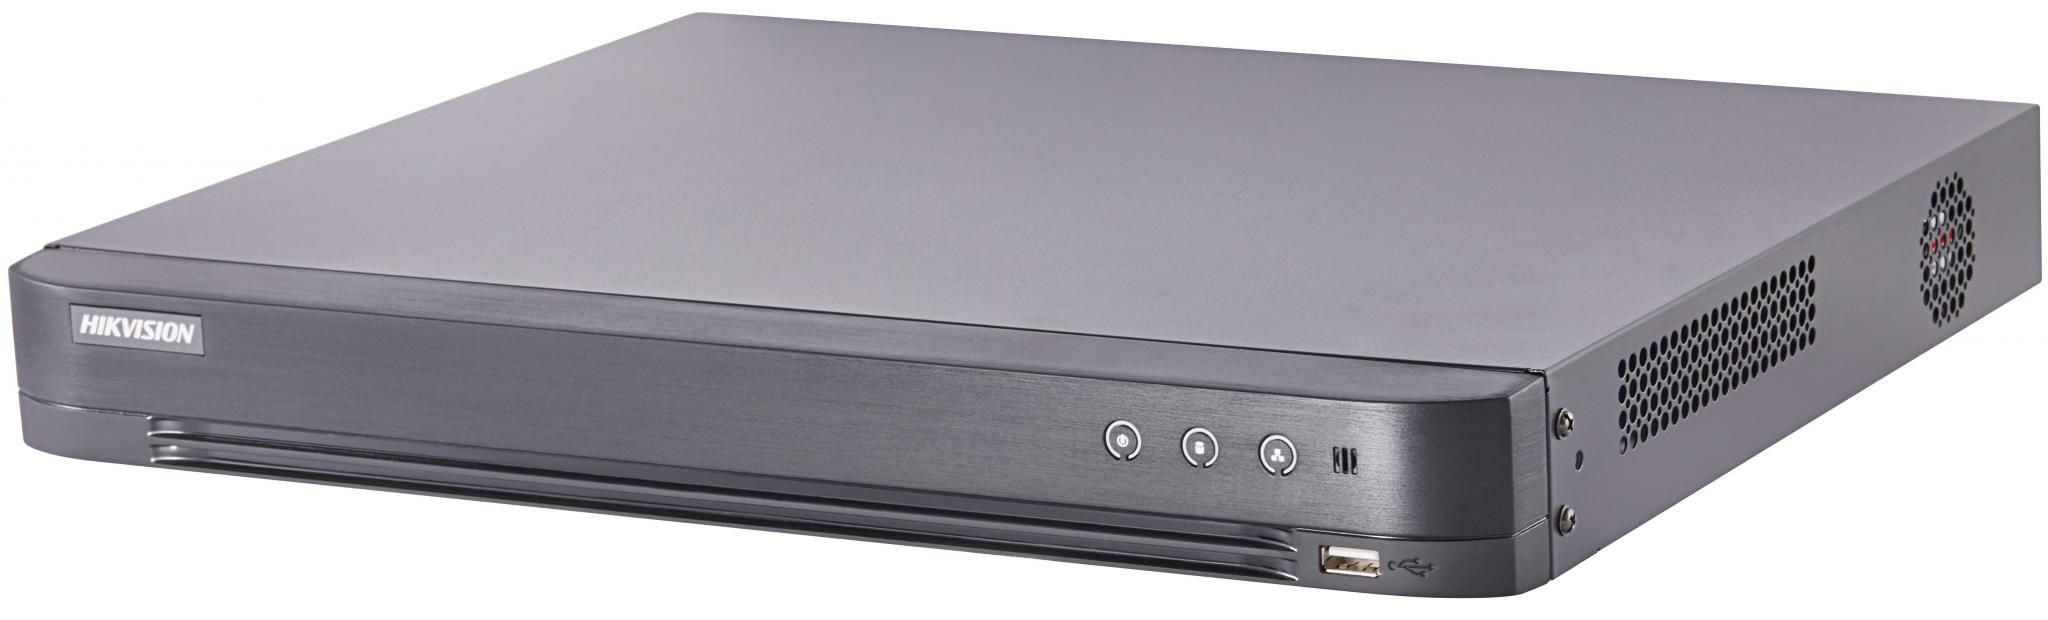 DVR Hikvision Turbo HD 4.0, DS-7204HUHI-K1/P; 5MP; 4 Channel; H265 +;H265;H264+;H264, 4-ch video and 4-ch audio input, 2-ch IP up to 6MP resolution input, 5MP @ 12fps/ch; 4MP @15 fps/ch, built-in PoC, 1 SATA interface, Connectable to Turbo HD/HDCVI/AHD/CVBS signal input, HDMI/VGA and CVBS Output, 2*_1